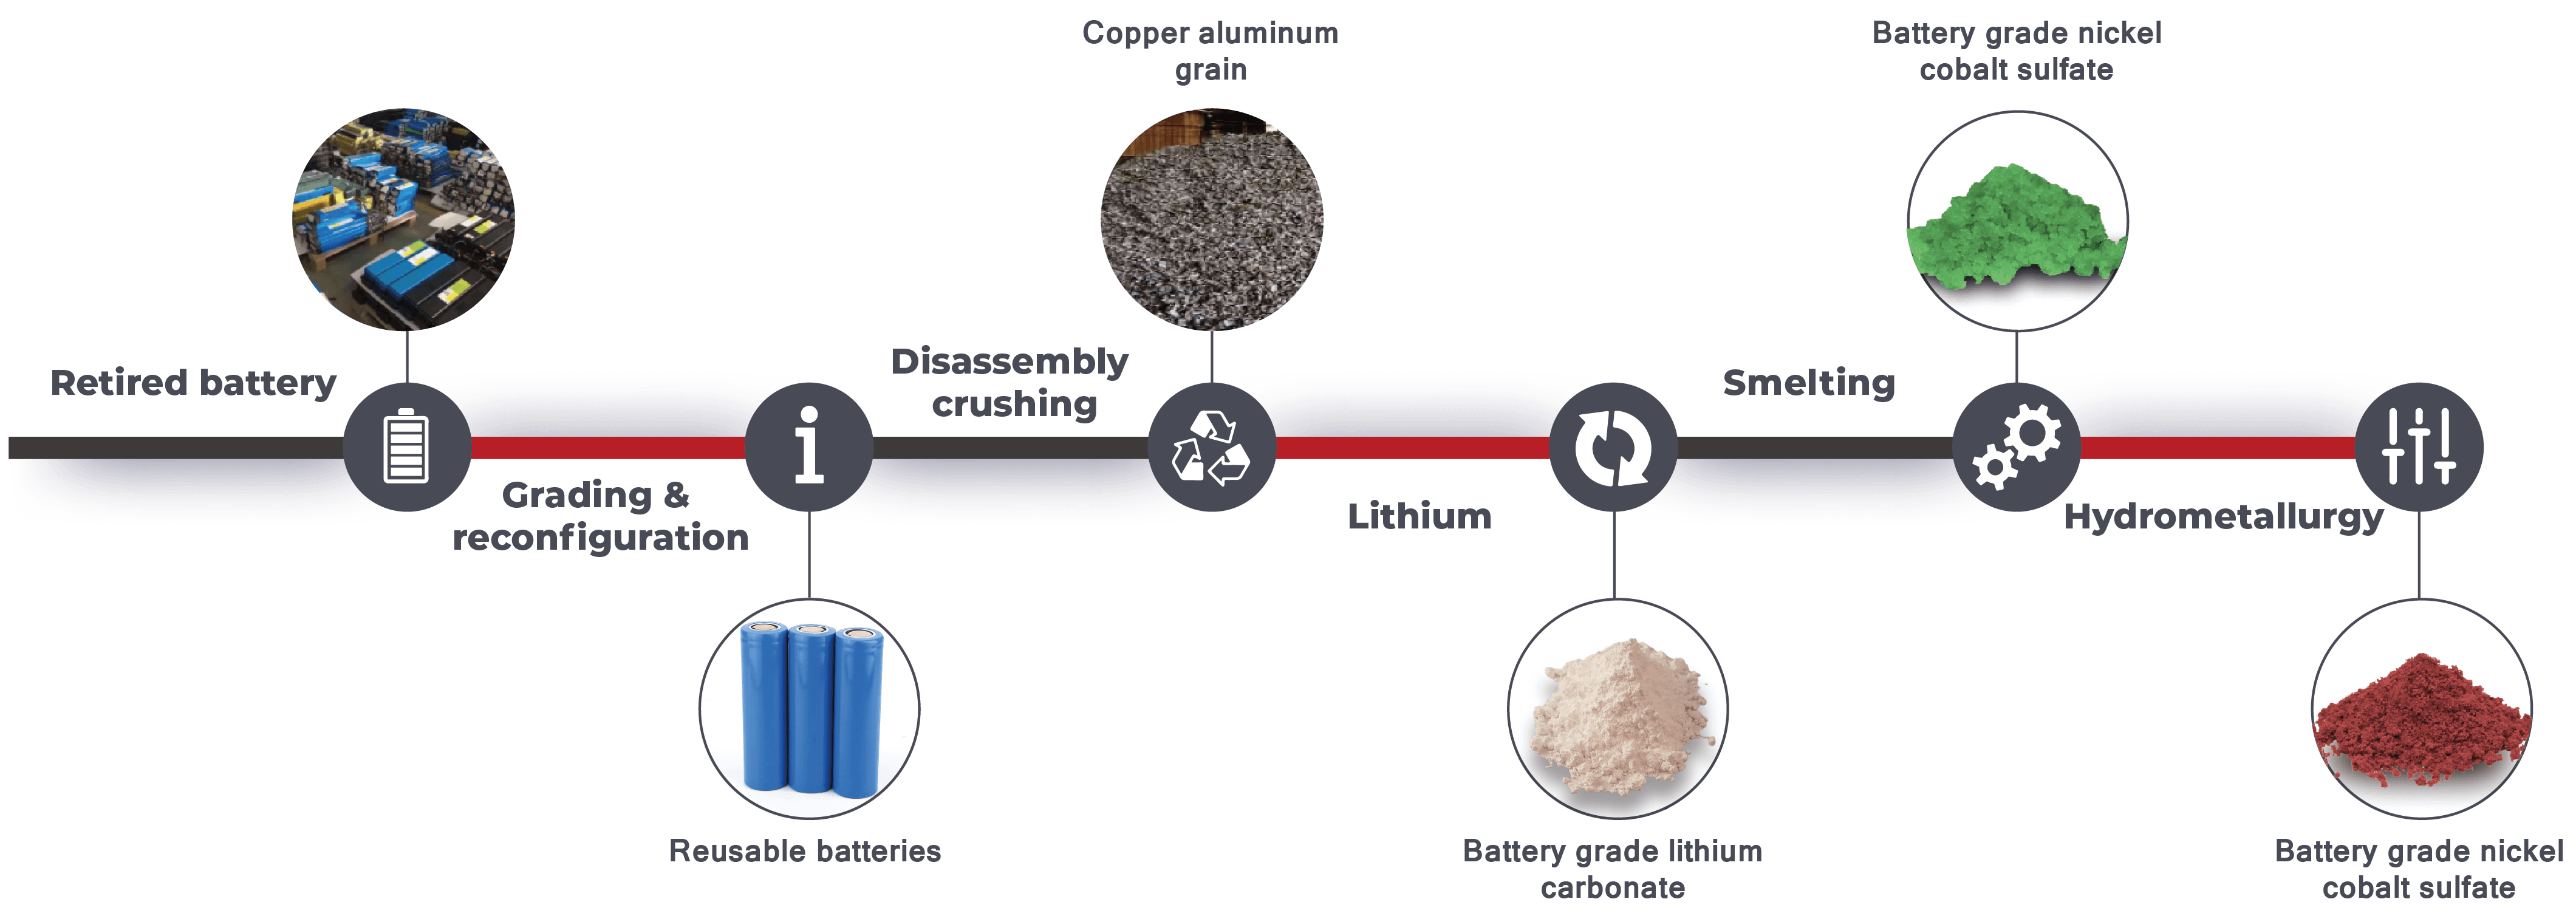 Different stages of recycling process